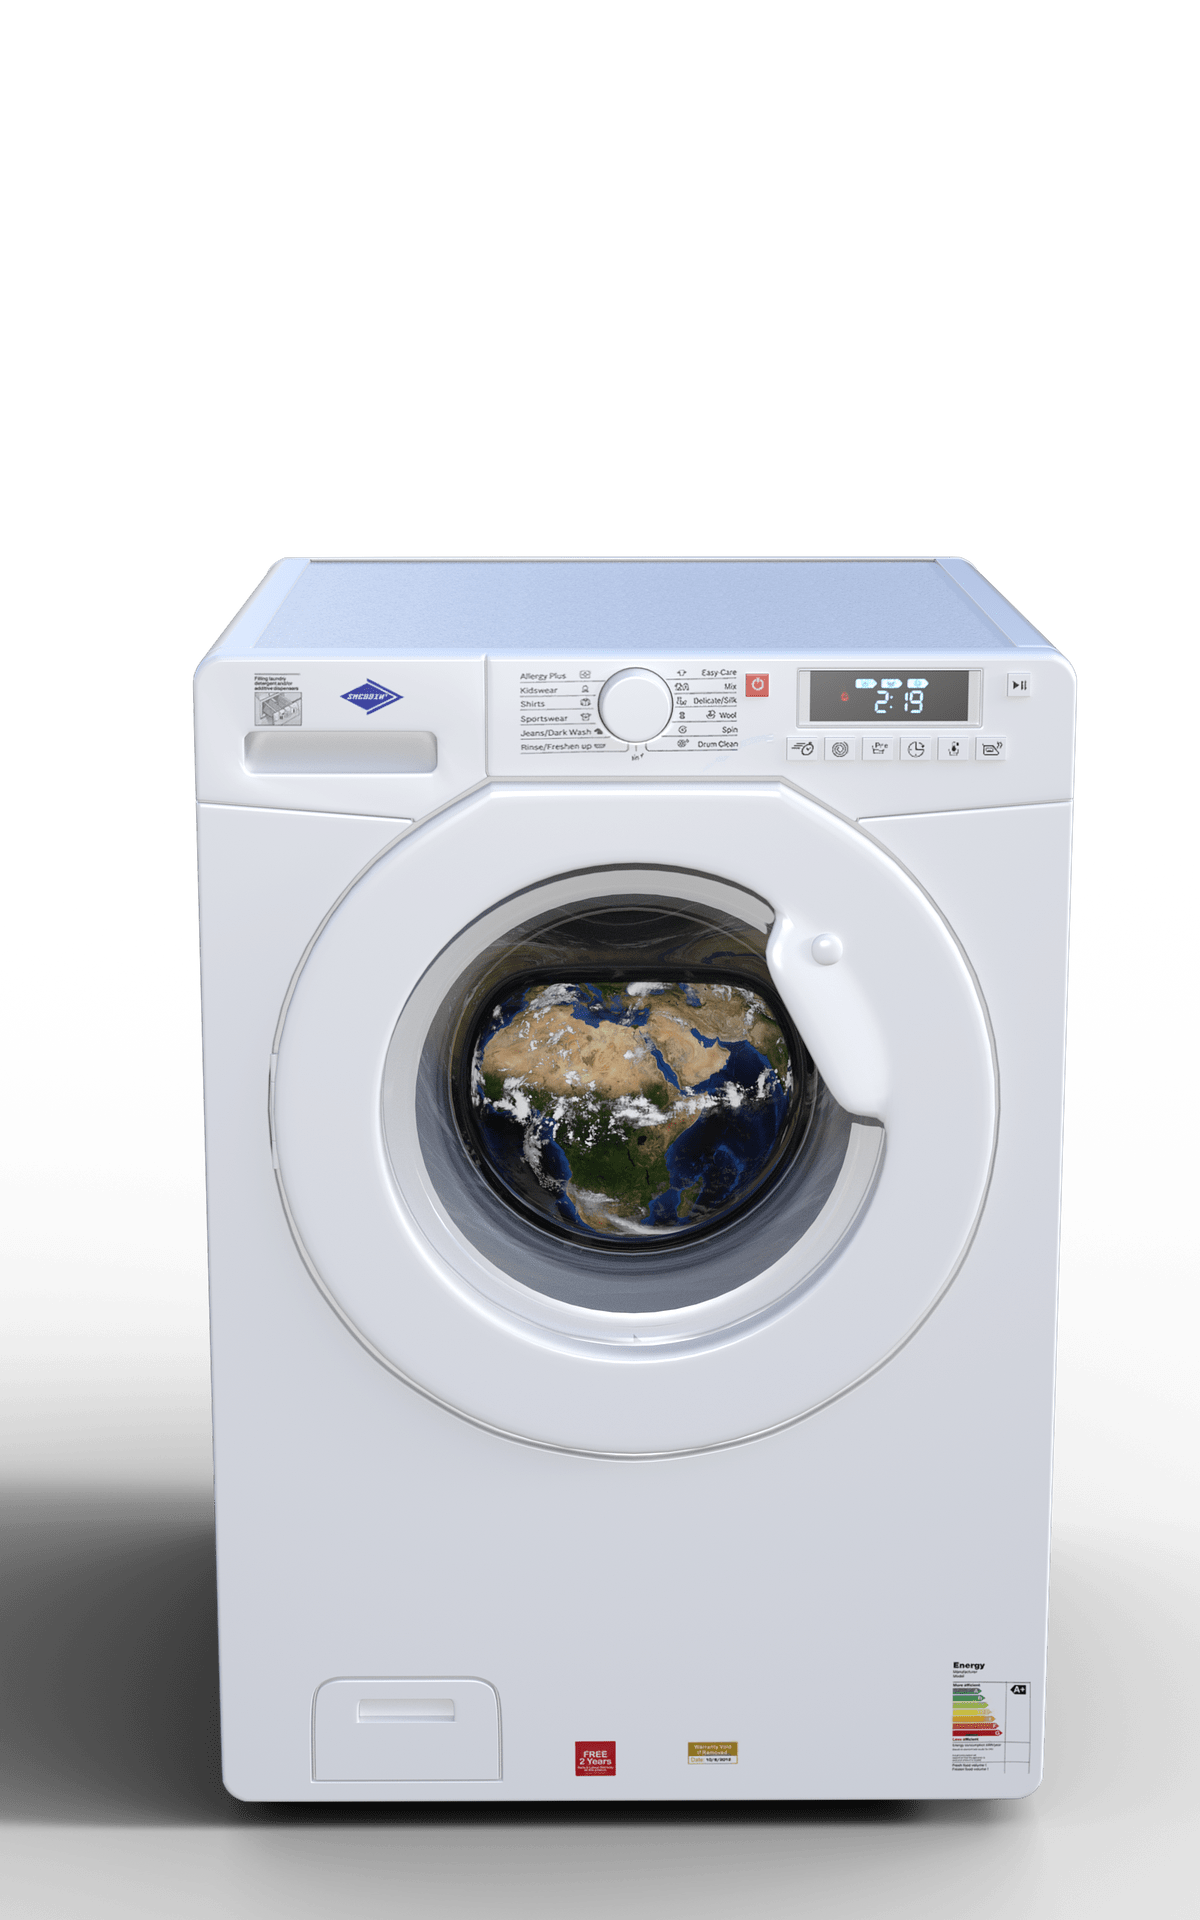 Washing machine (Main product with advanced prices)